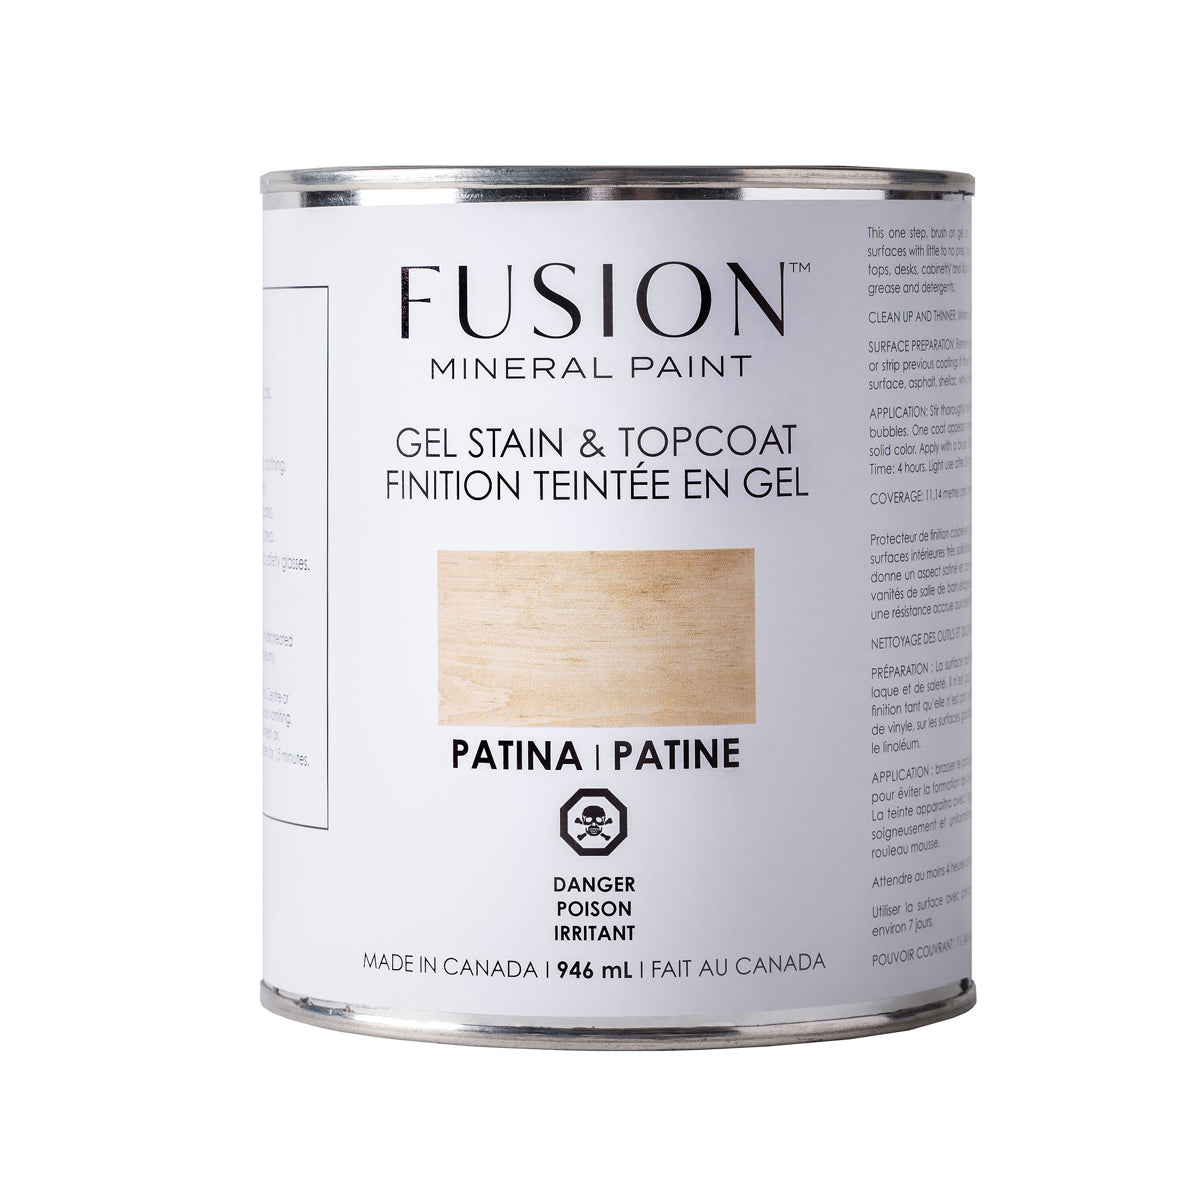 Fusion Mineral Paint™ - Gel Stain & Topcoat